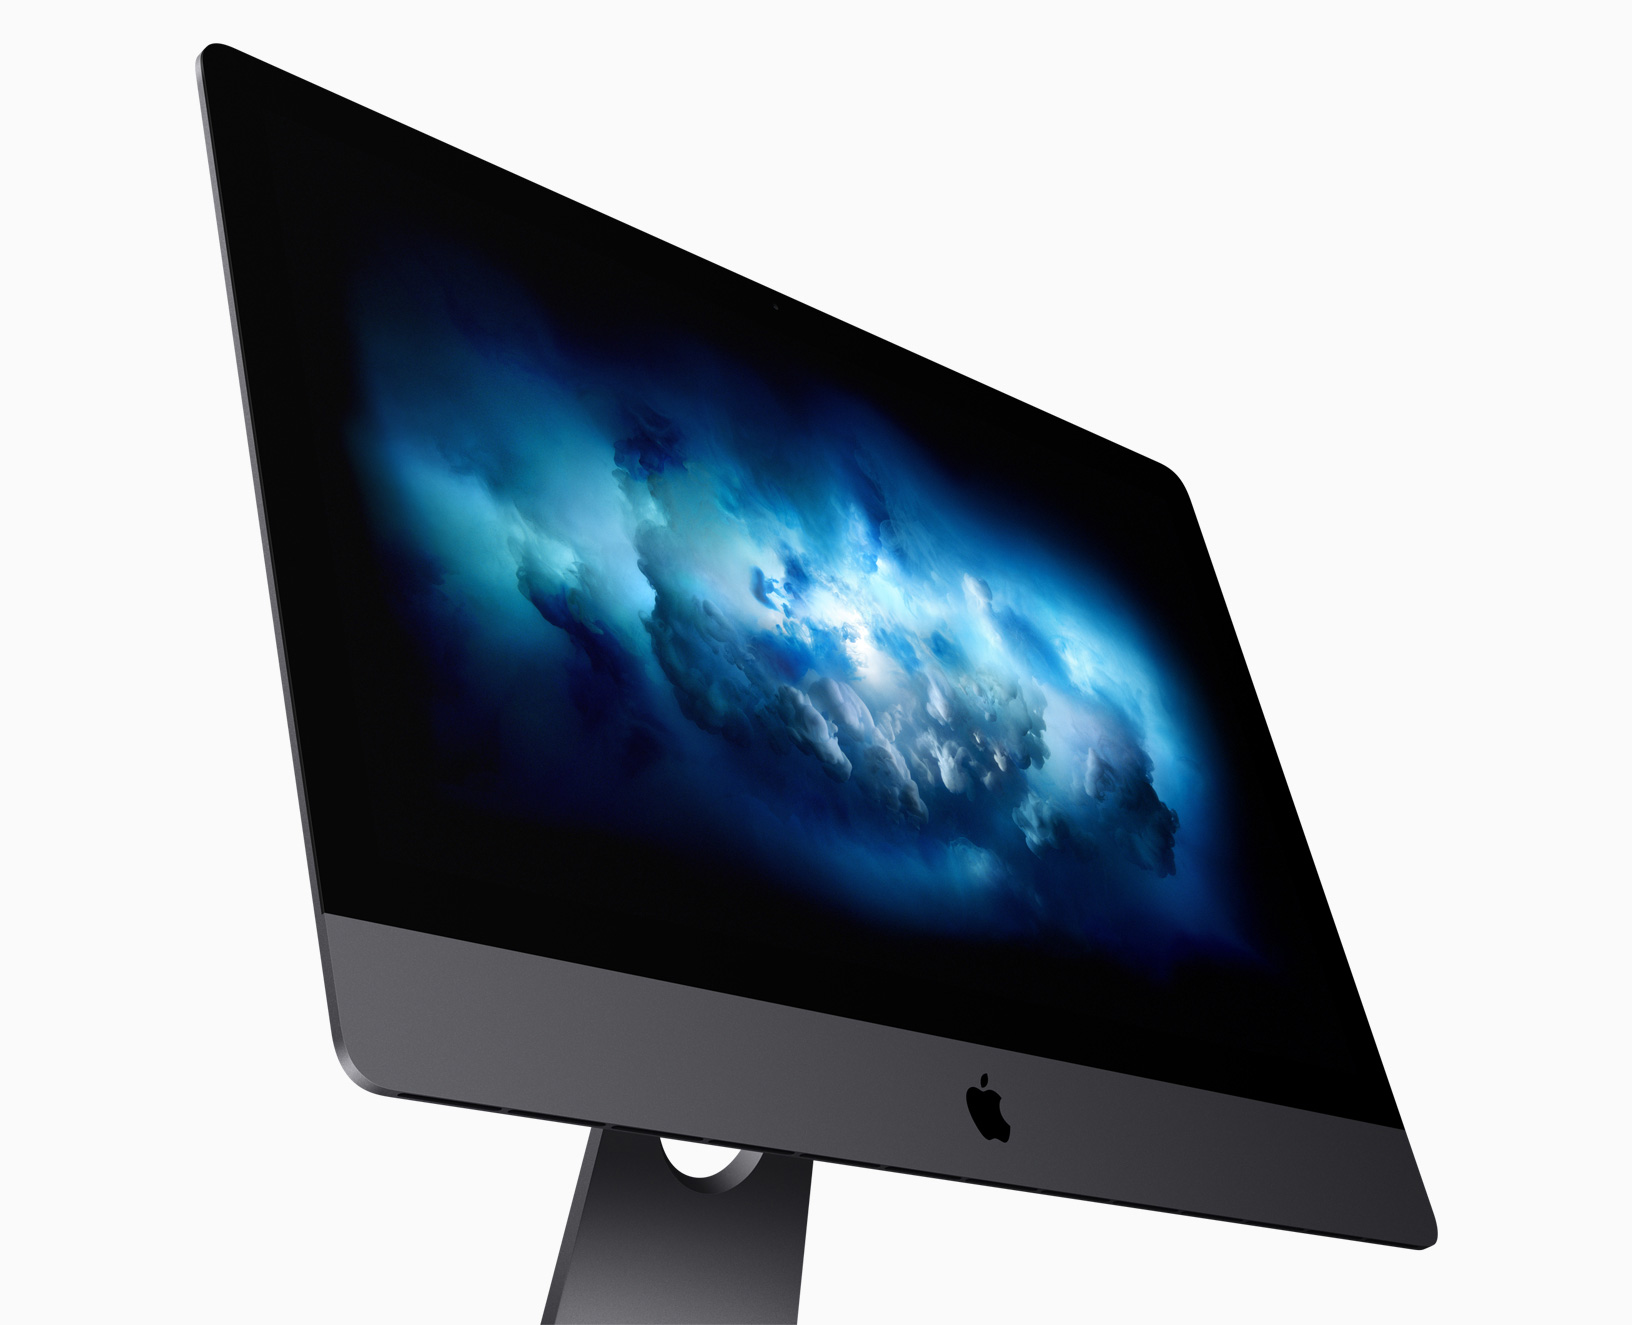 Apple iMac Pro Is Officially Confirmed, Powerful Luxurious MAC & AMD VEGA